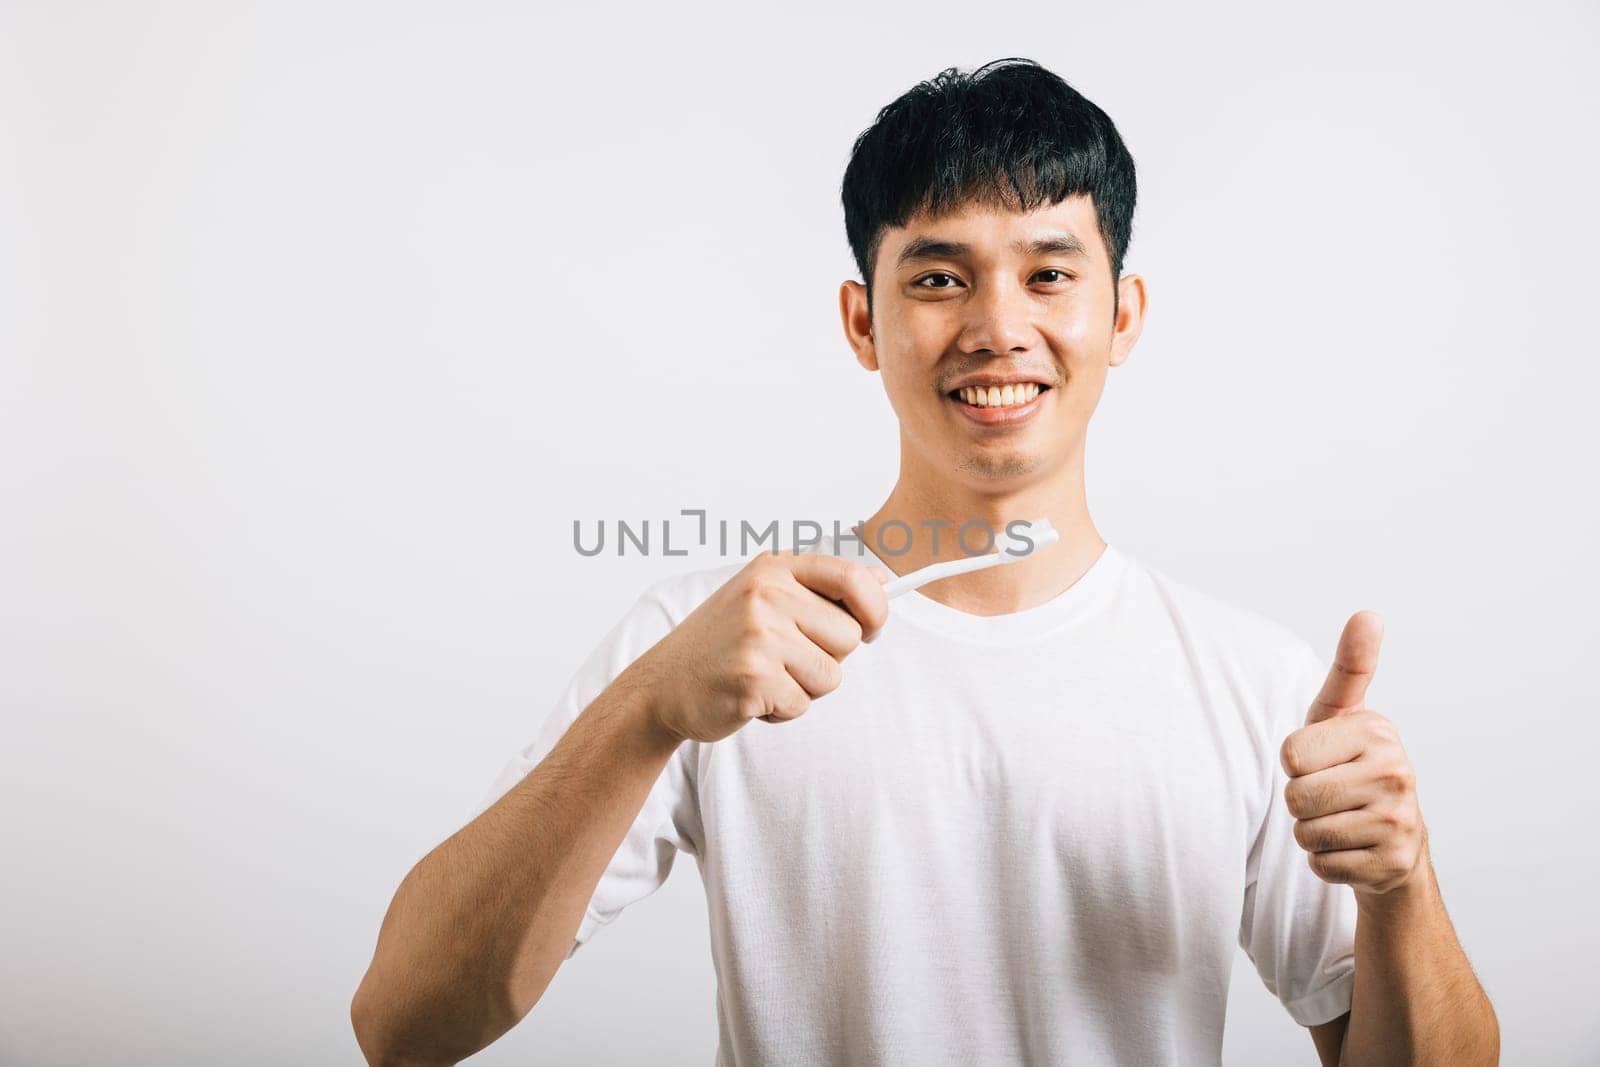 A confident Asian teenager promotes dental health by brushing his teeth with a smile and a thumbs-up. Studio shot isolated on white, emphasizing dental care and oral hygiene.